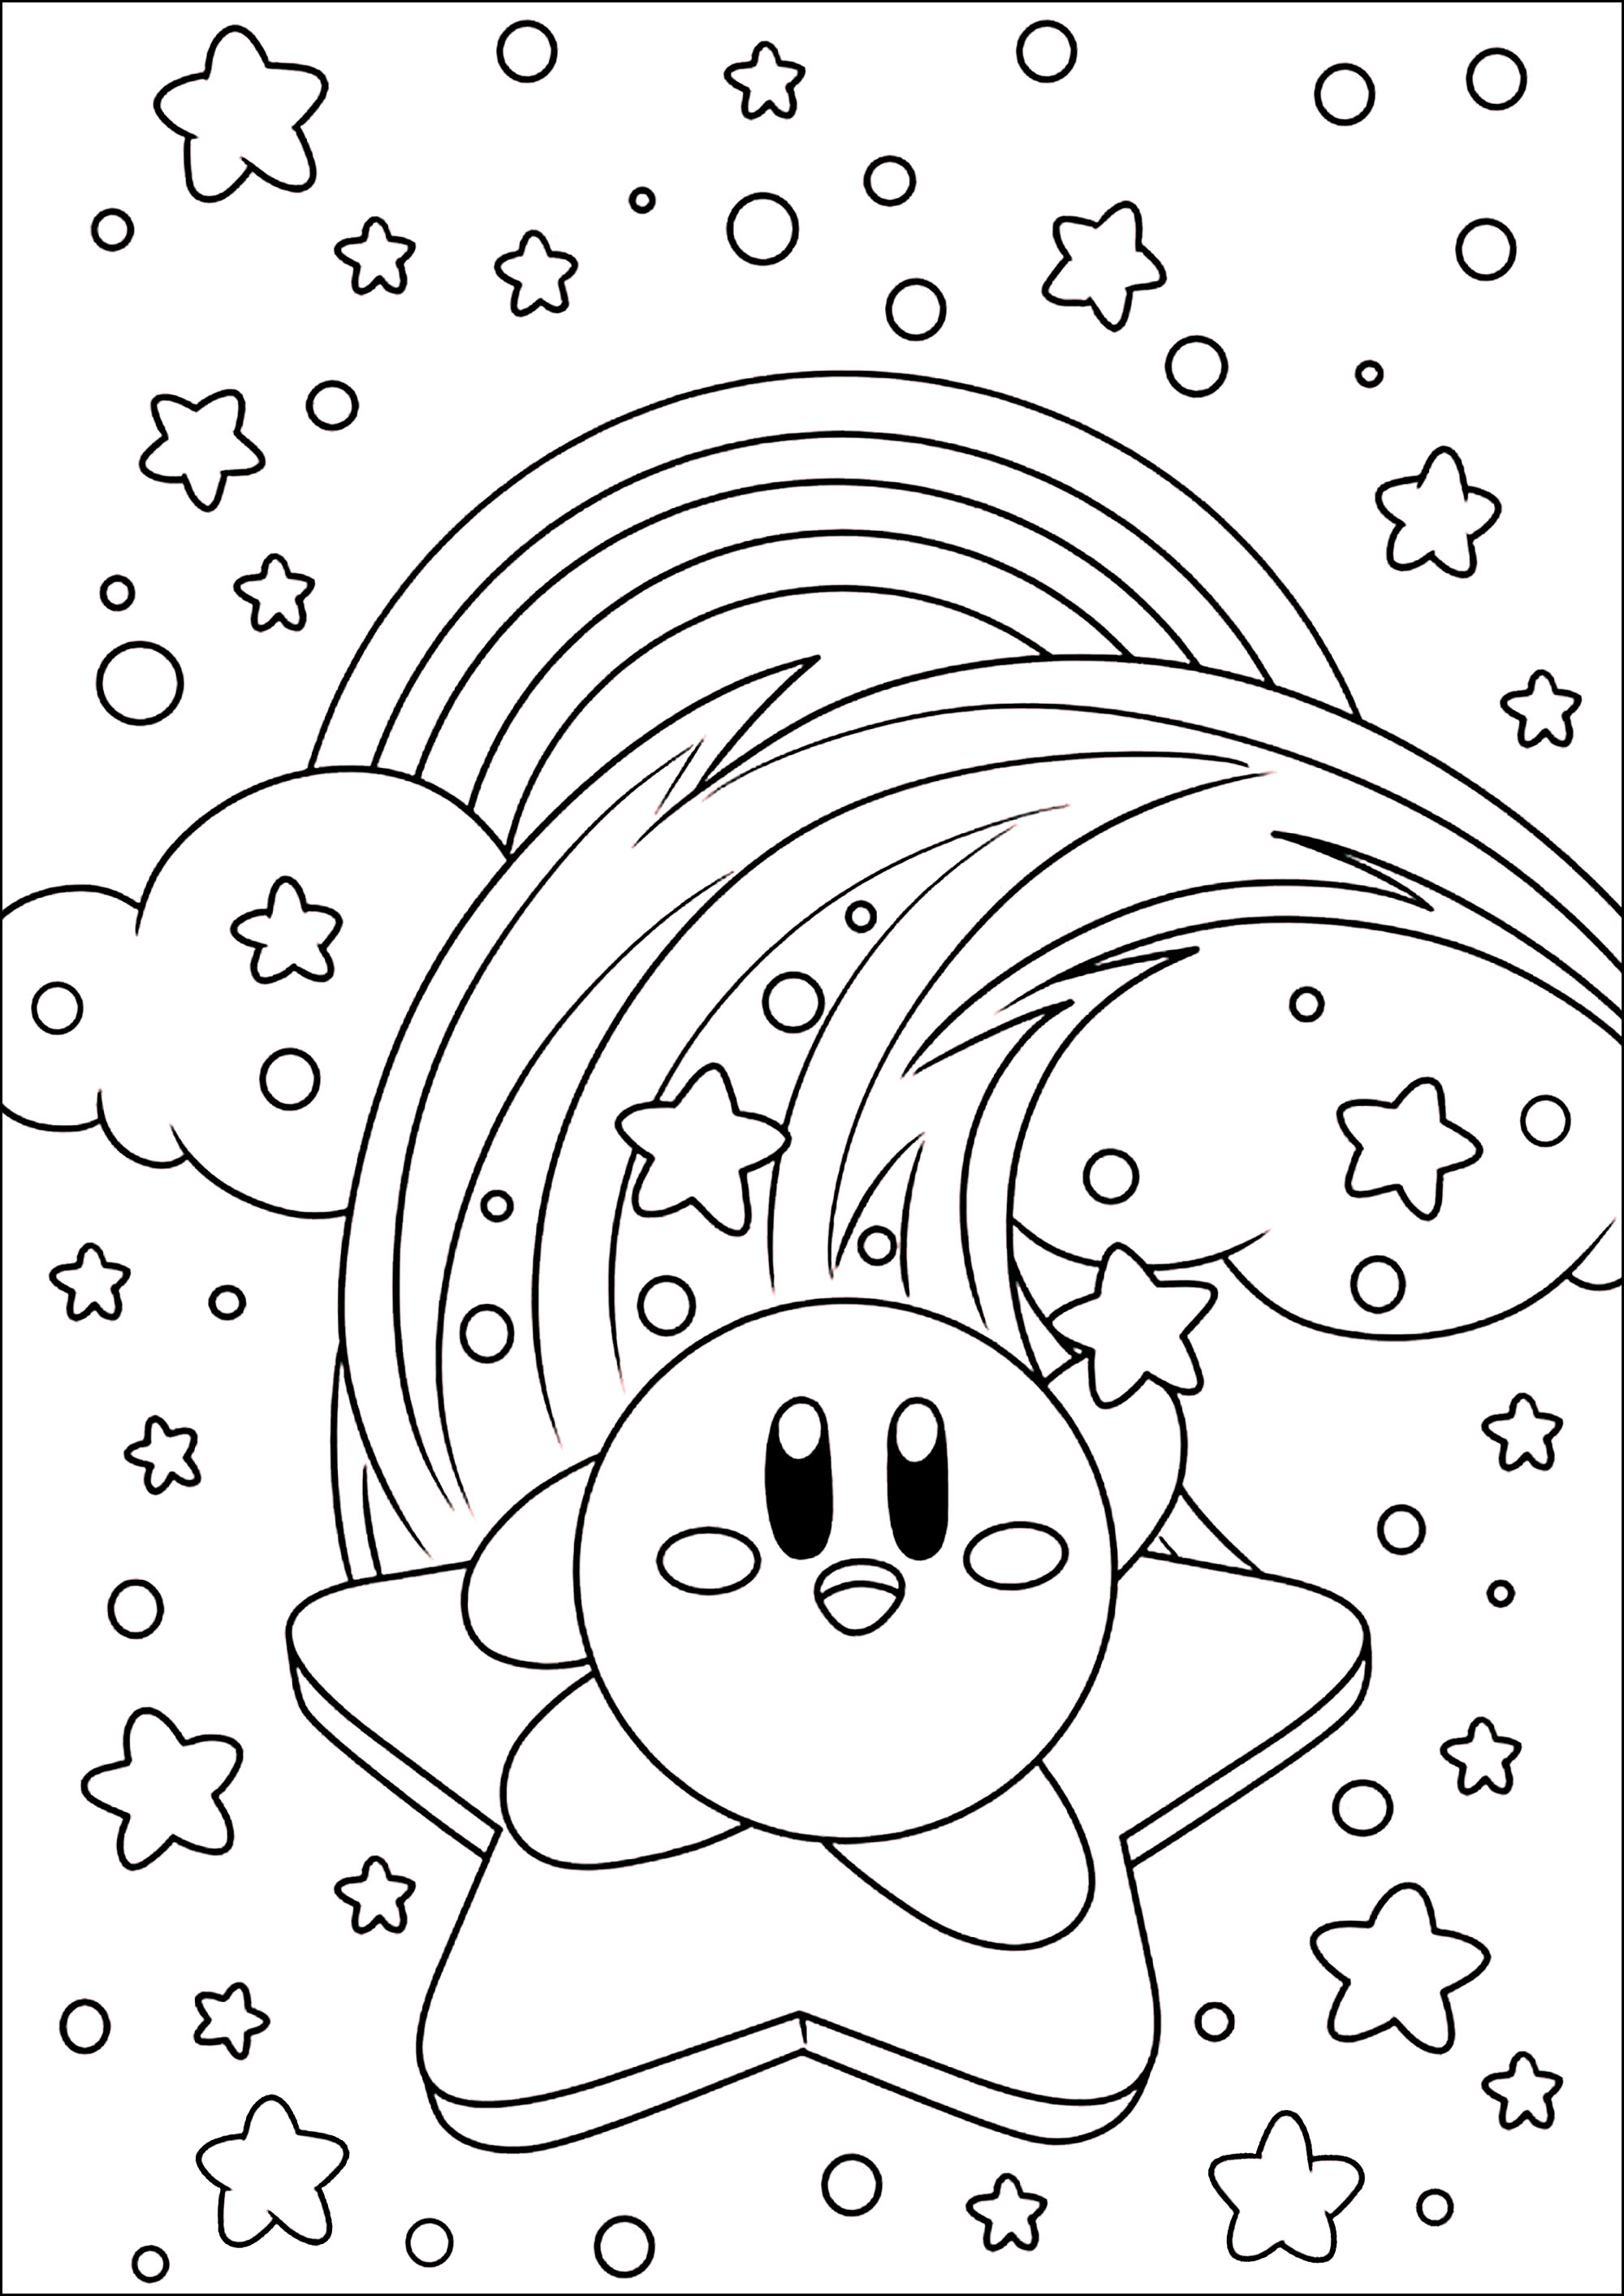 Kirby on a star in the sky with clouds and rainbow